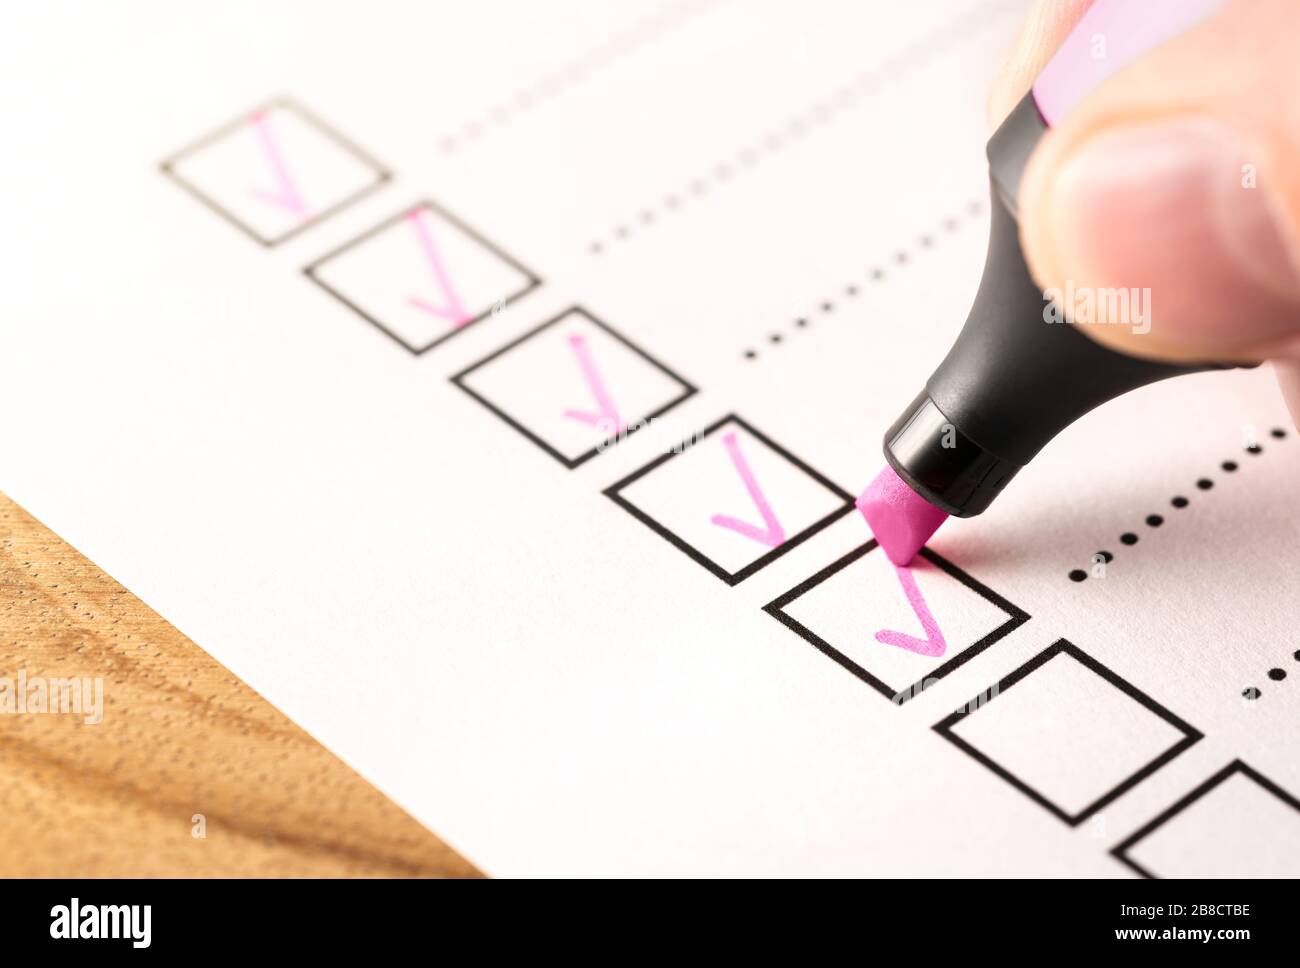 Checklist, keeping score of obligations or completed tasks in project concept. Check list document of finished work duties, progress or agenda. Stock Photo